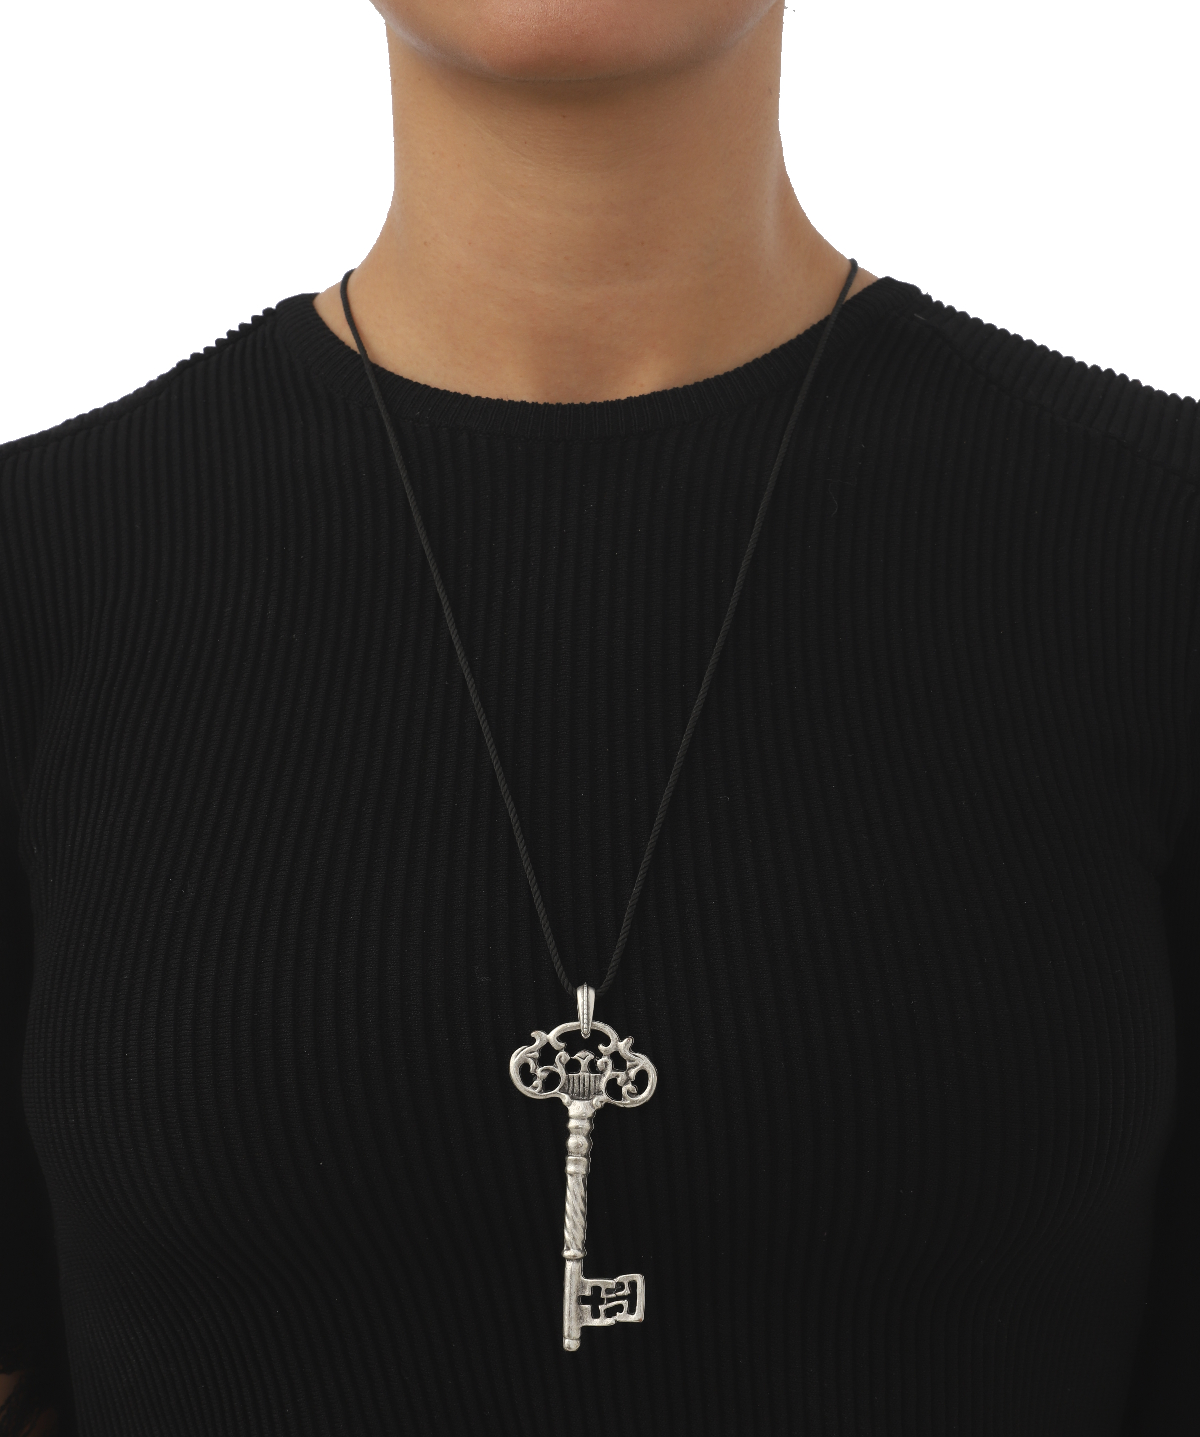 Silver Plated Key Necklace That Open the Gates of Luck and Love